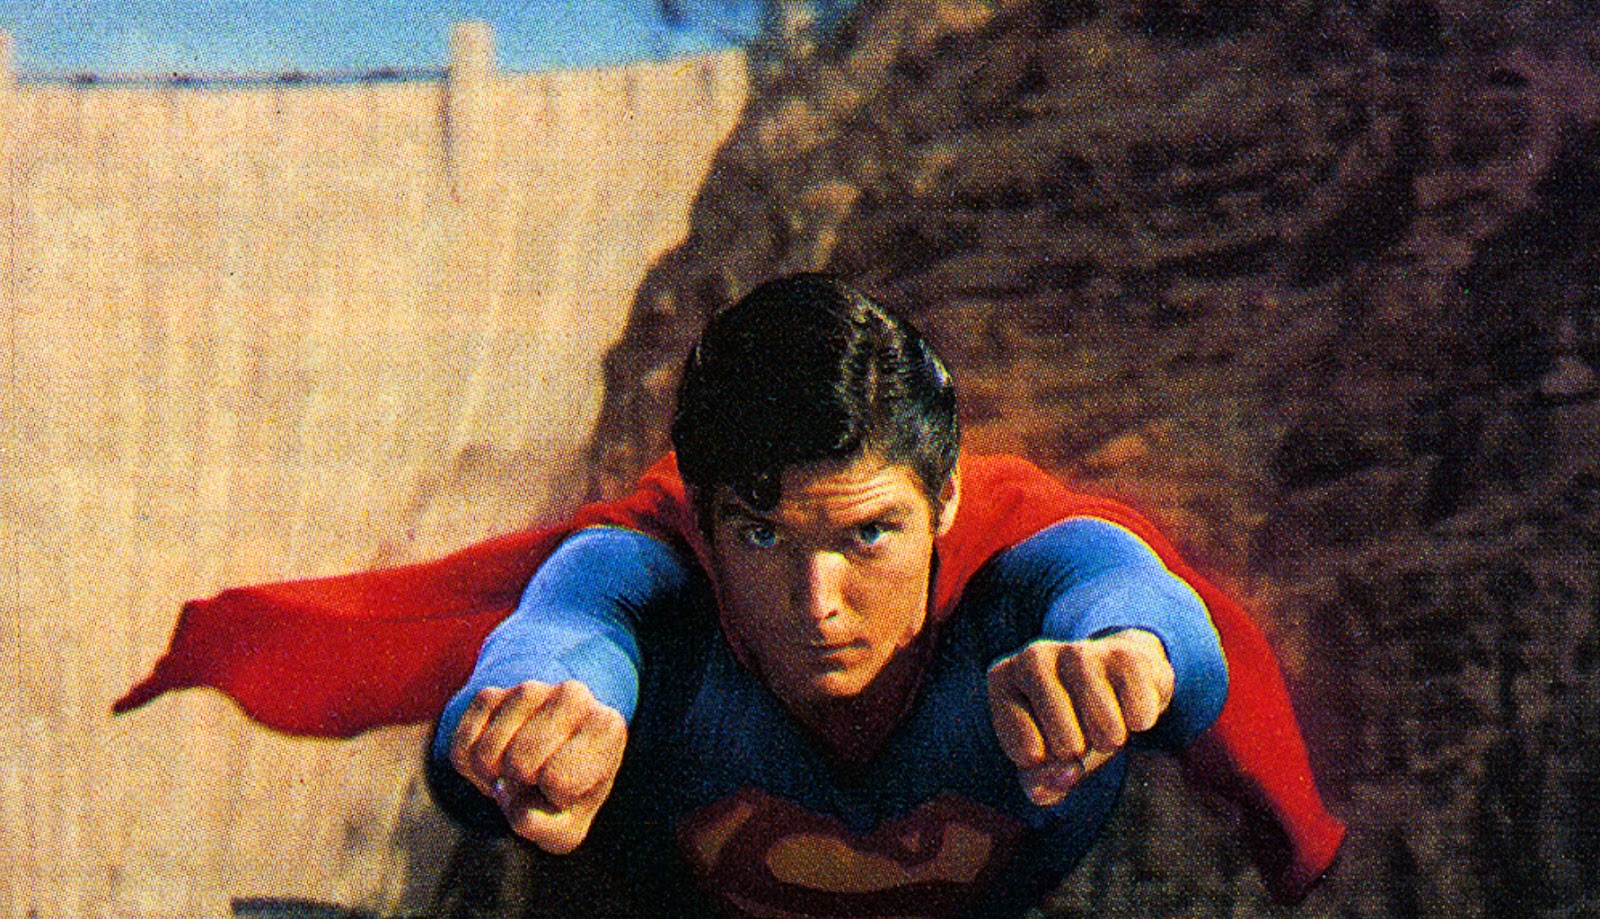 Christopher Reeves, Superman